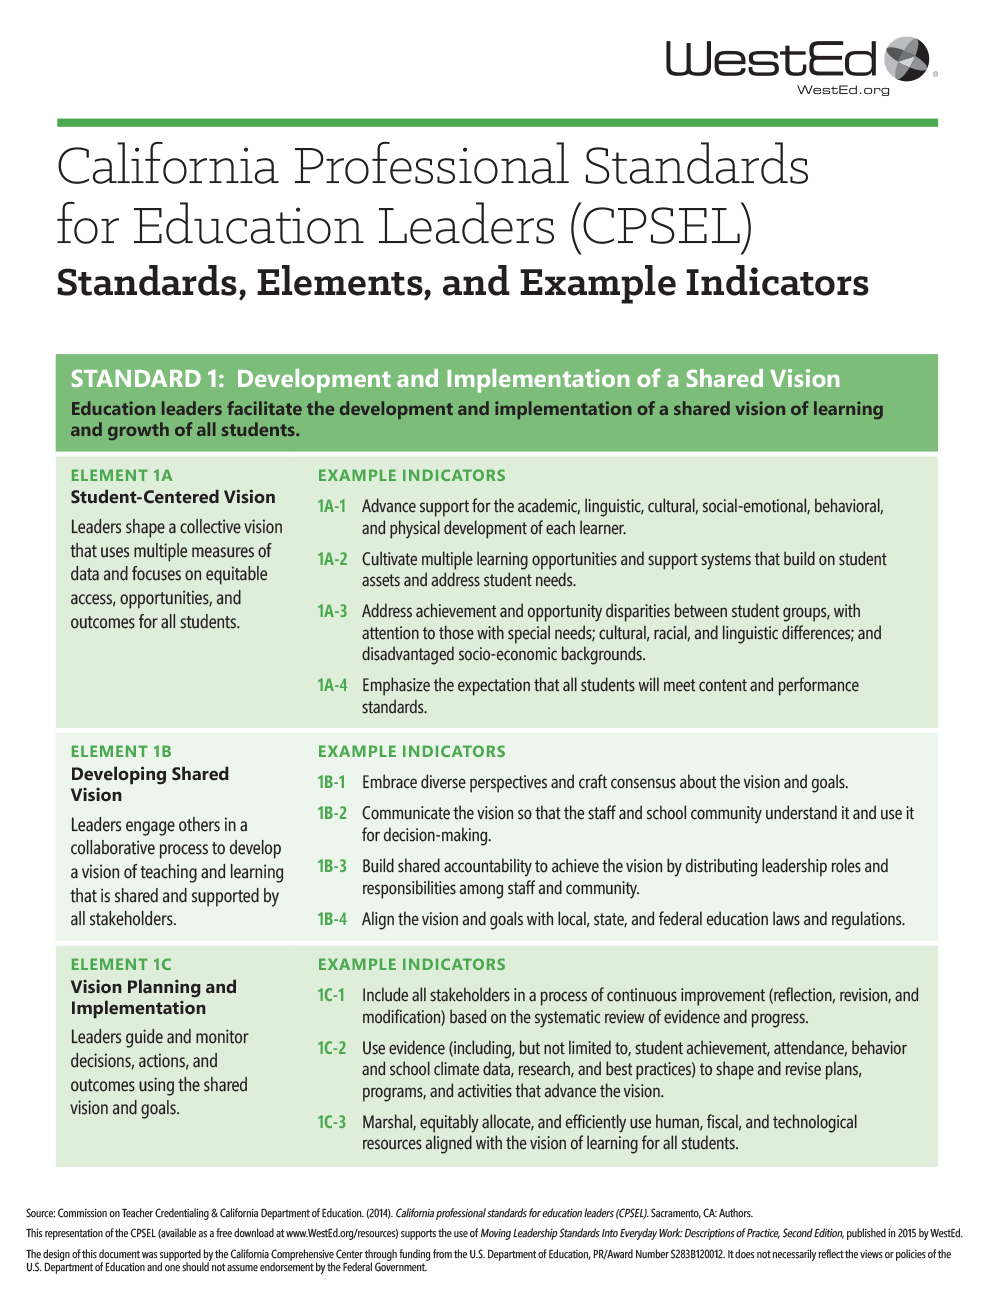 California Standards For The Teaching Profession Chart